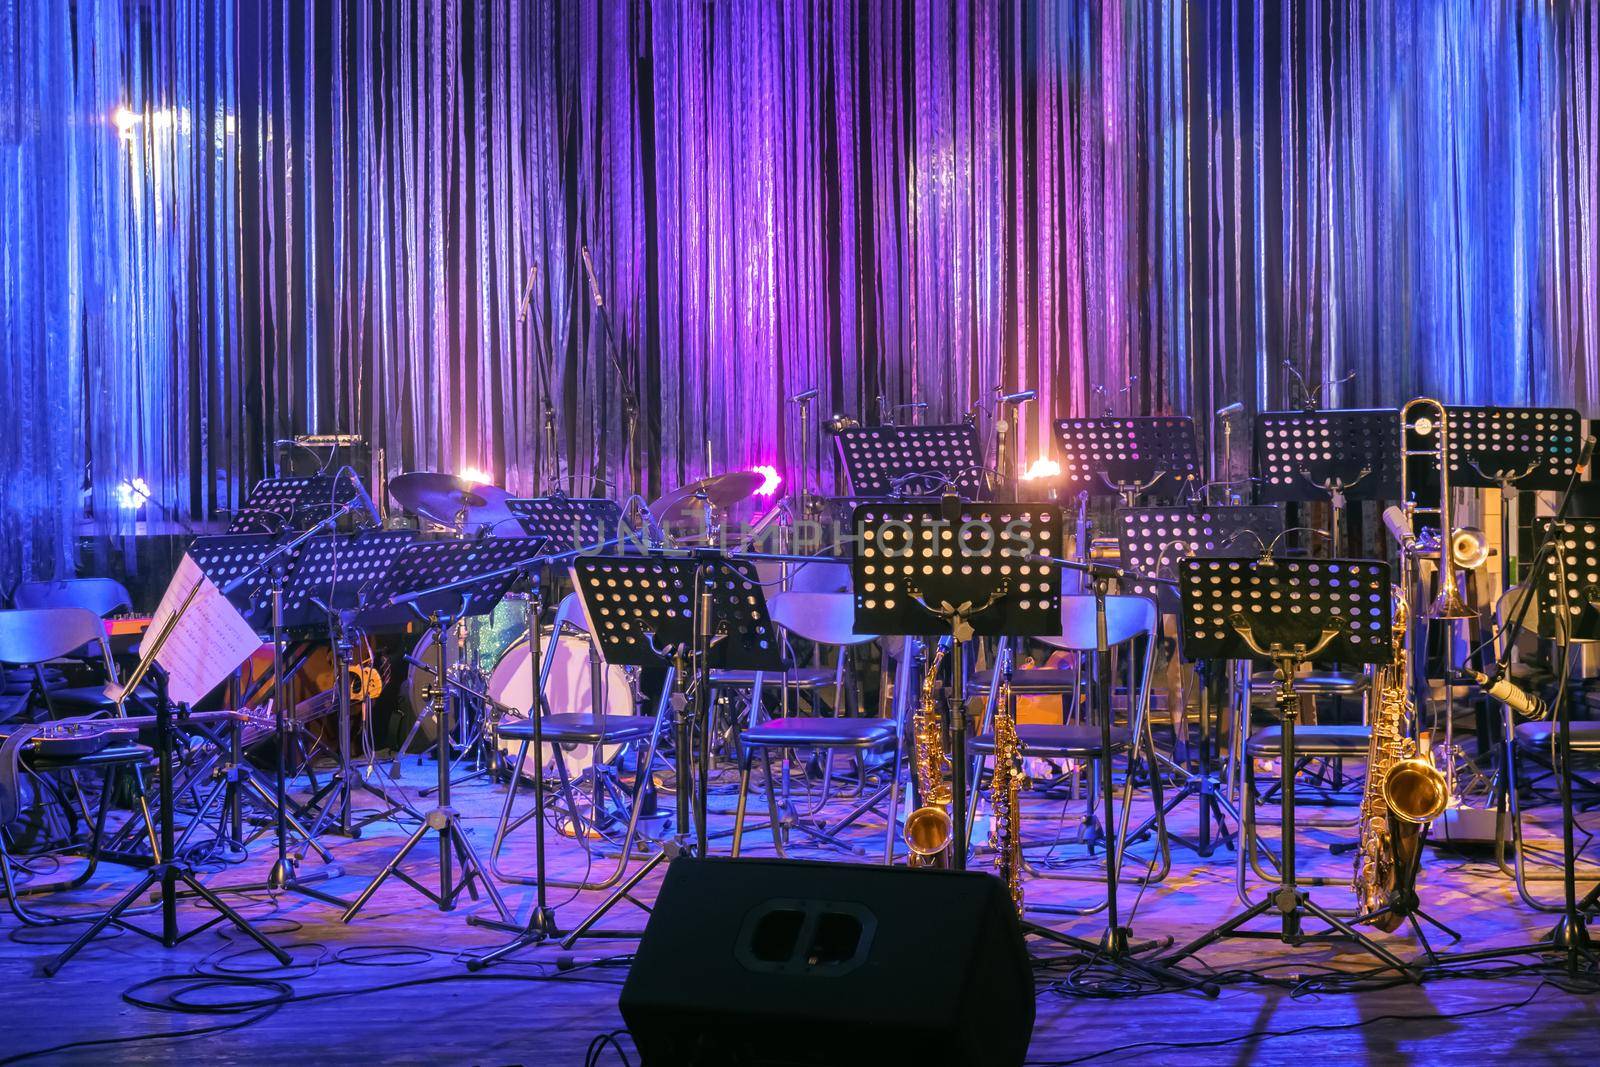 Musical Instruments and Sheet Music Standing Ready on a Stage for a Live Performace at Rock or Jazz Concert or Festival in Colourful Lighting. Empty Stage for Orchestra. Online Music Concert or Event by synel